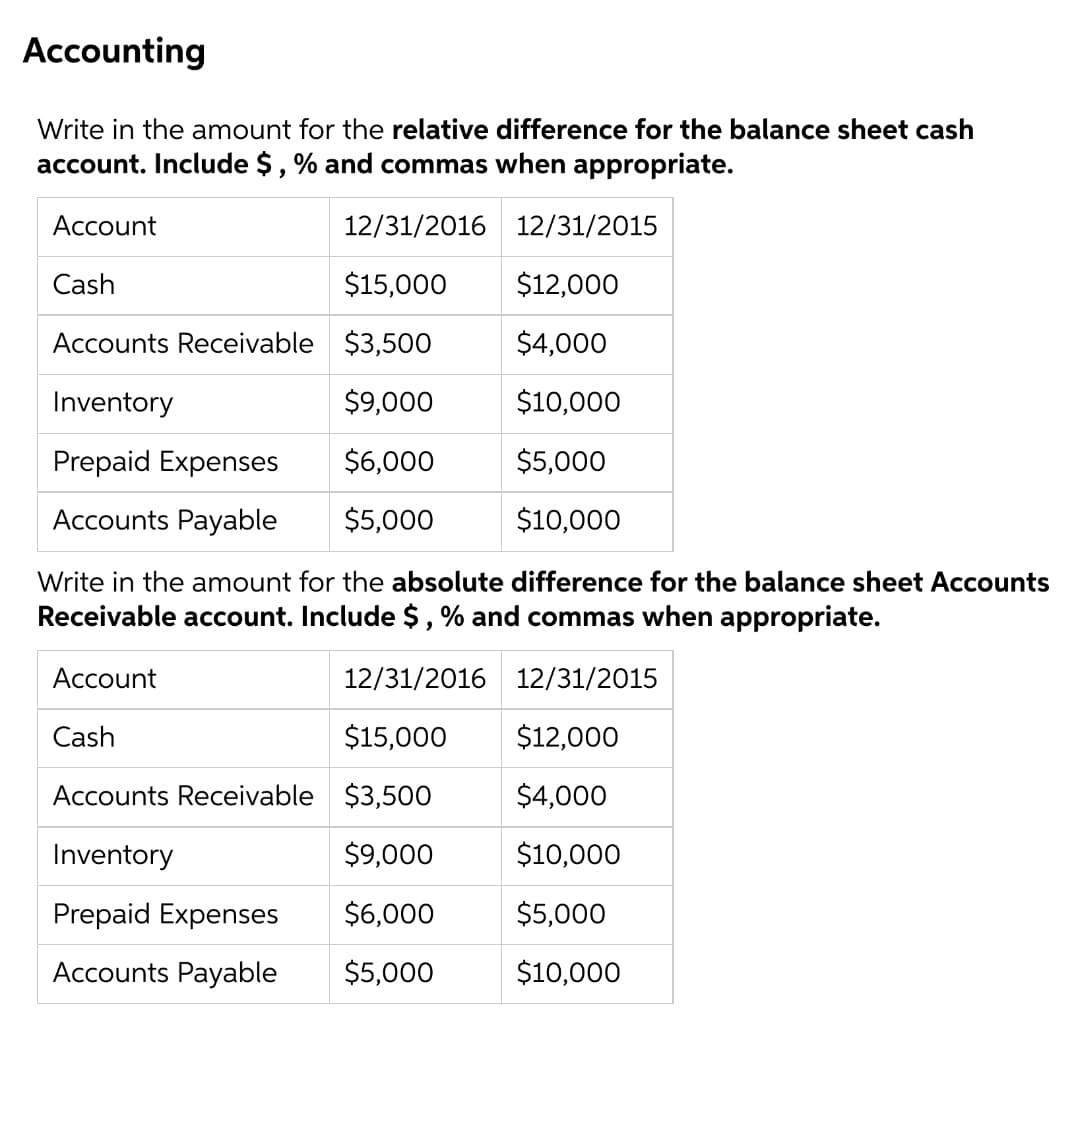 Accounting
Write in the amount for the relative difference for the balance sheet cash
account. Include $,% and commas when appropriate.
Account
12/31/2016 12/31/2015
Cash
$15,000
$12,000
Accounts Receivable $3,500
$4,000
Inventory
$9,000
$10,000
Prepaid Expenses
$6,000
$5,000
Accounts Payable
$5,000
$10,000
Write in the amount for the absolute difference for the balance sheet Accounts
Receivable account. Include $,% and commas when appropriate.
Account
12/31/2016 12/31/2015
Cash
$15,000
$12,000
Accounts Receivable $3,500
$4,000
Inventory
$9,000
$10,000
Prepaid Expenses
$6,000
$5,000
Accounts Payable
$5,000
$10,000
